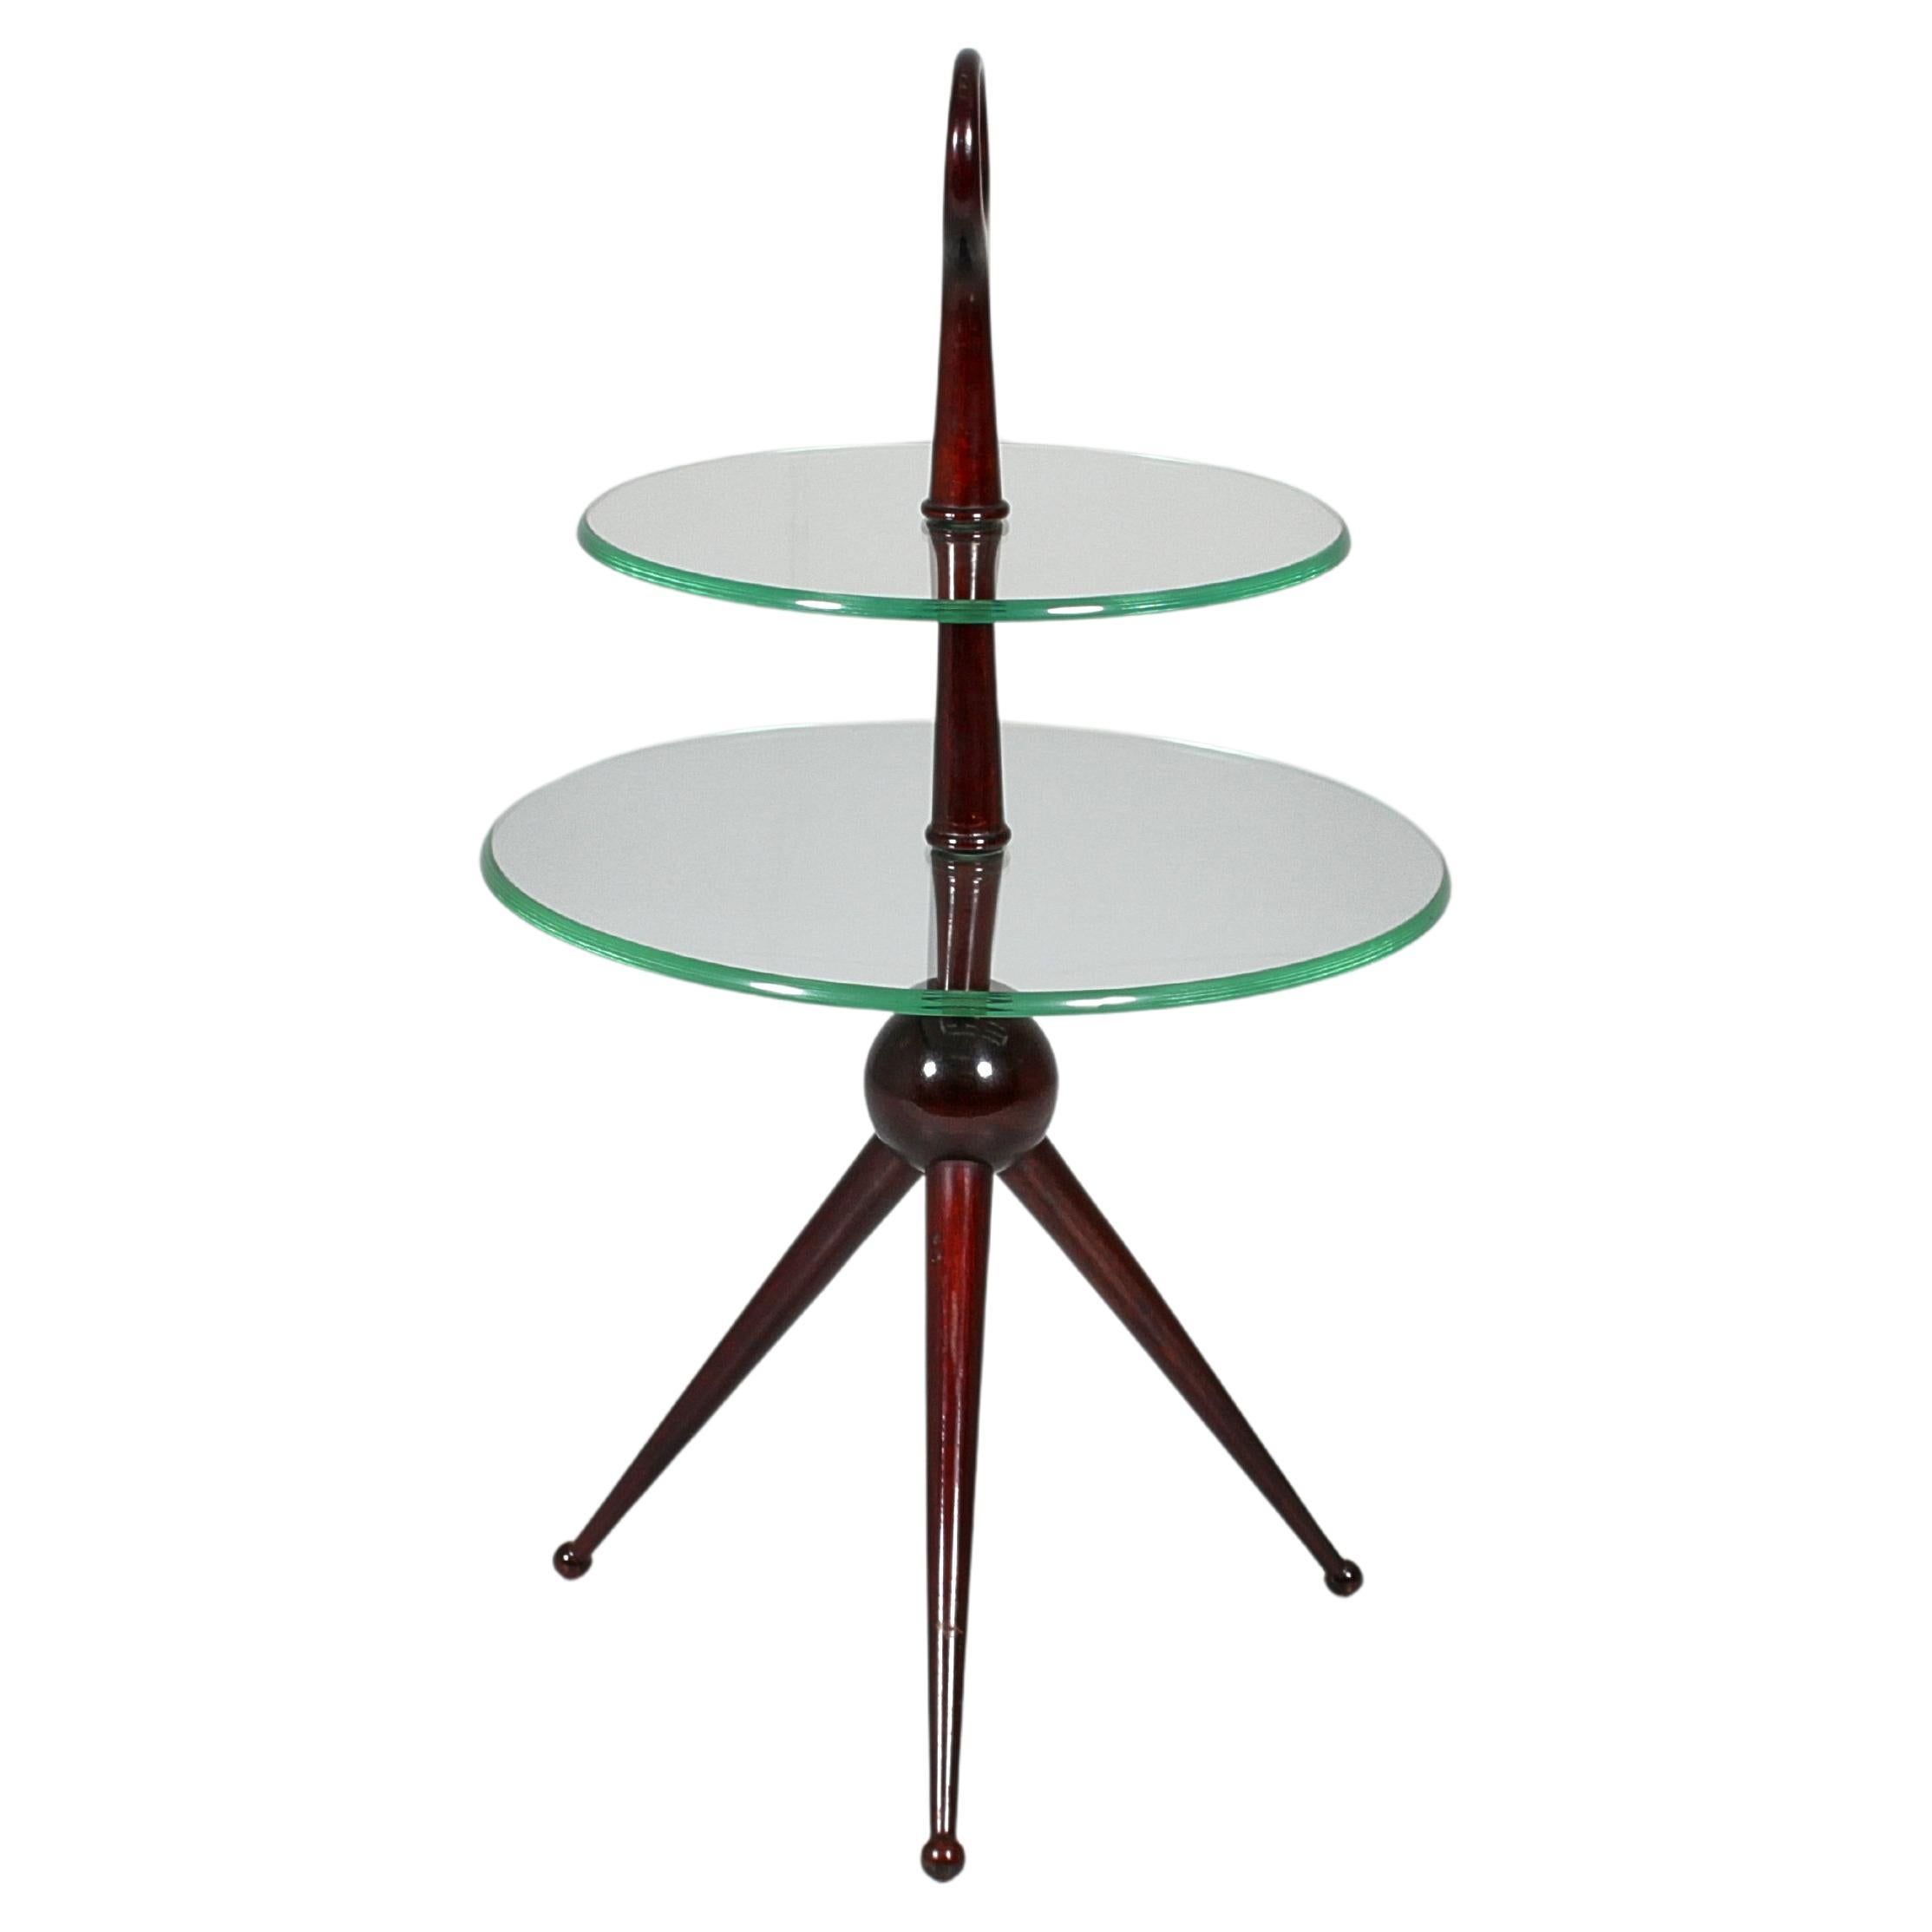 Delightful wooden tripod side table  with a double circular top in cut glass, the upper one having a smaller diameter. By Cesare Lacca, Italy 1950s.
Wear consistent with age and use.